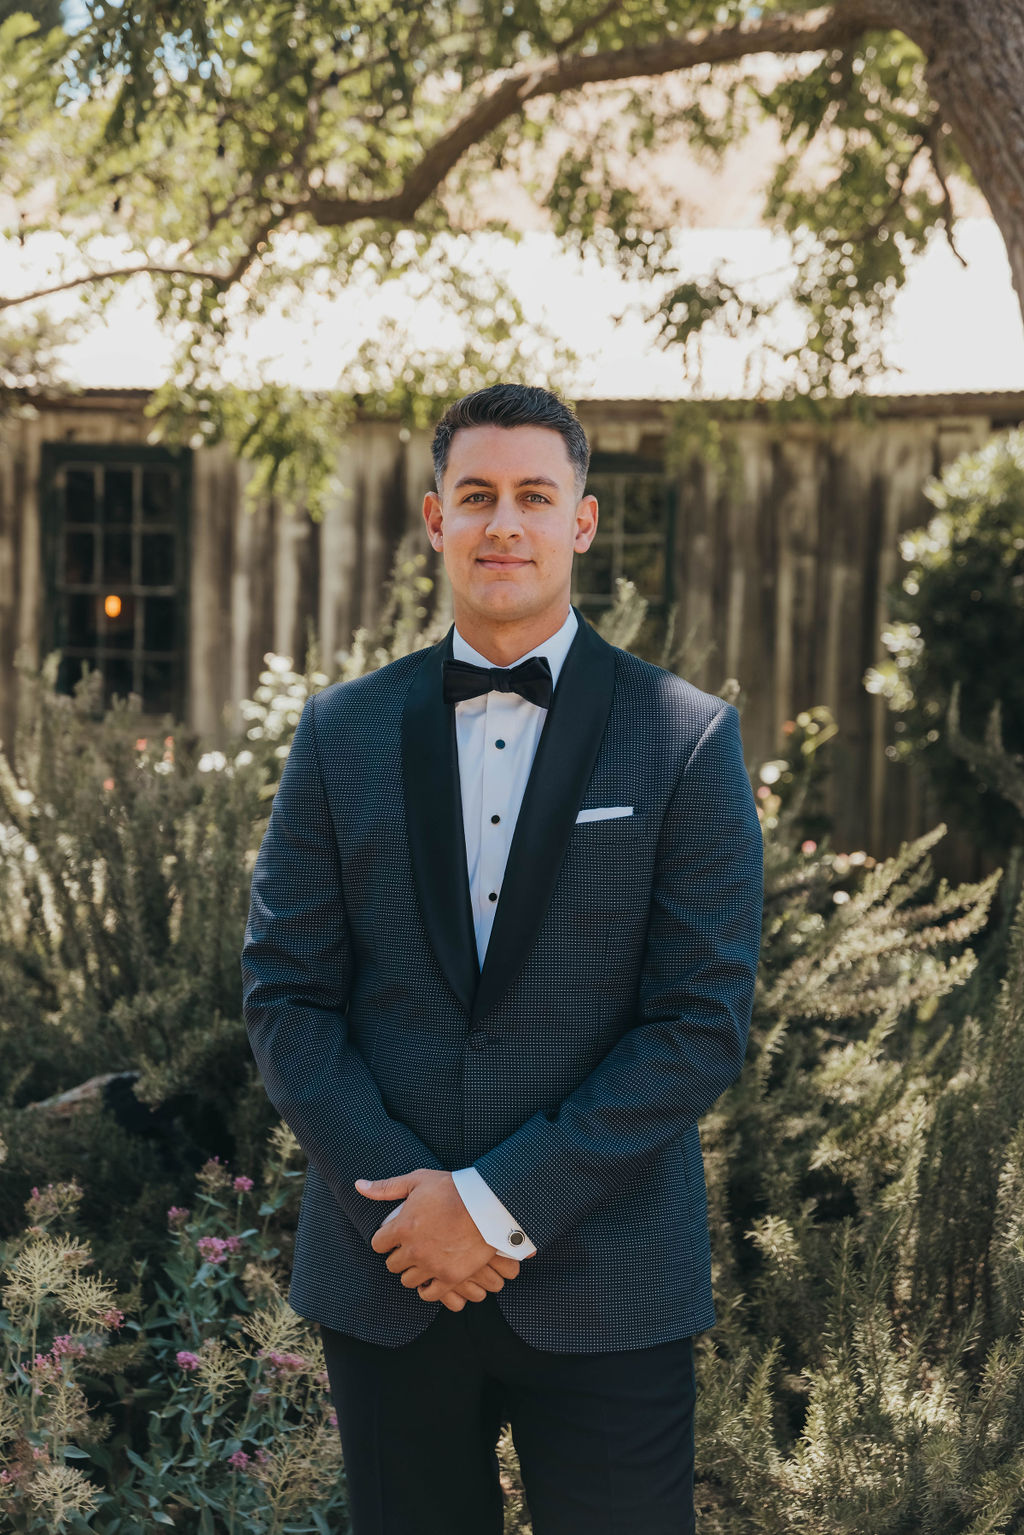 A man in a dark suit and bow tie standing confidently outdoors with a rustic wooden building and lush greenery in the background.